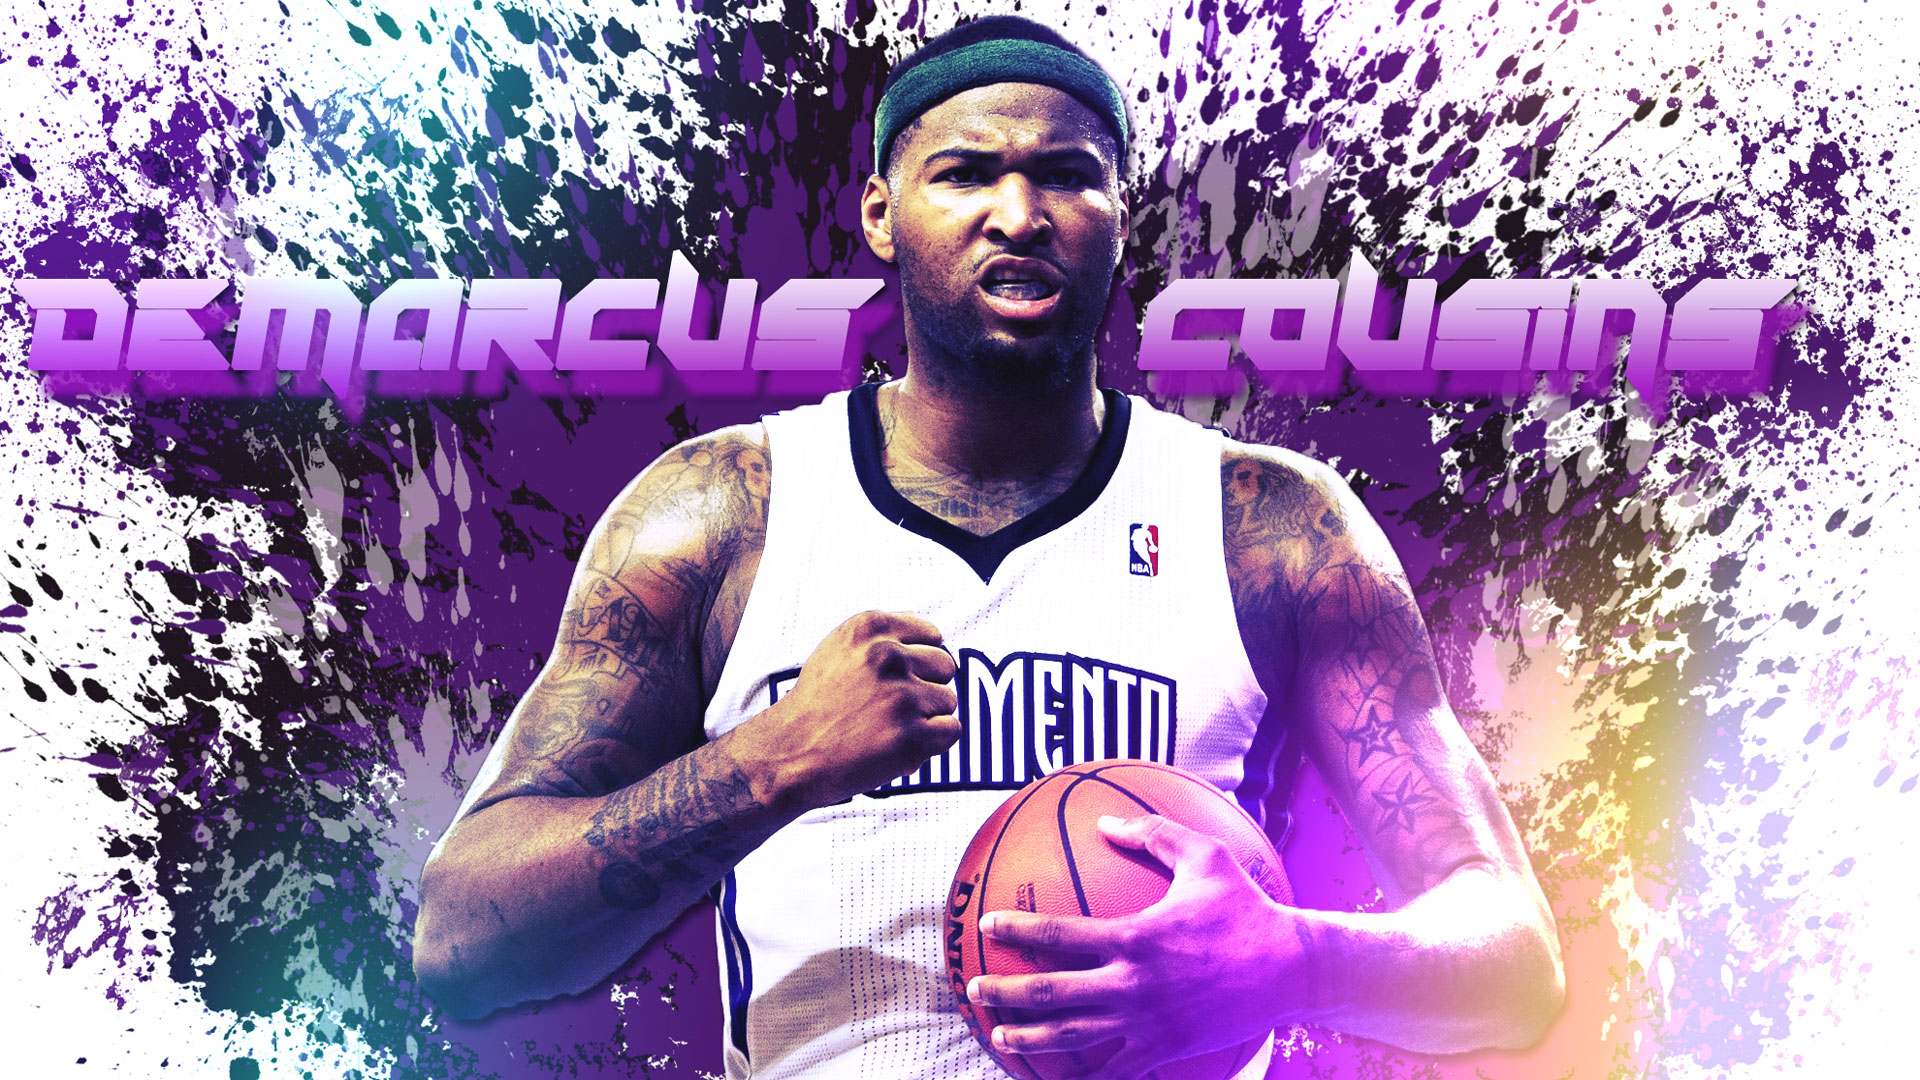 Demarcus Cousins Kings HD Wallpaper Background Image